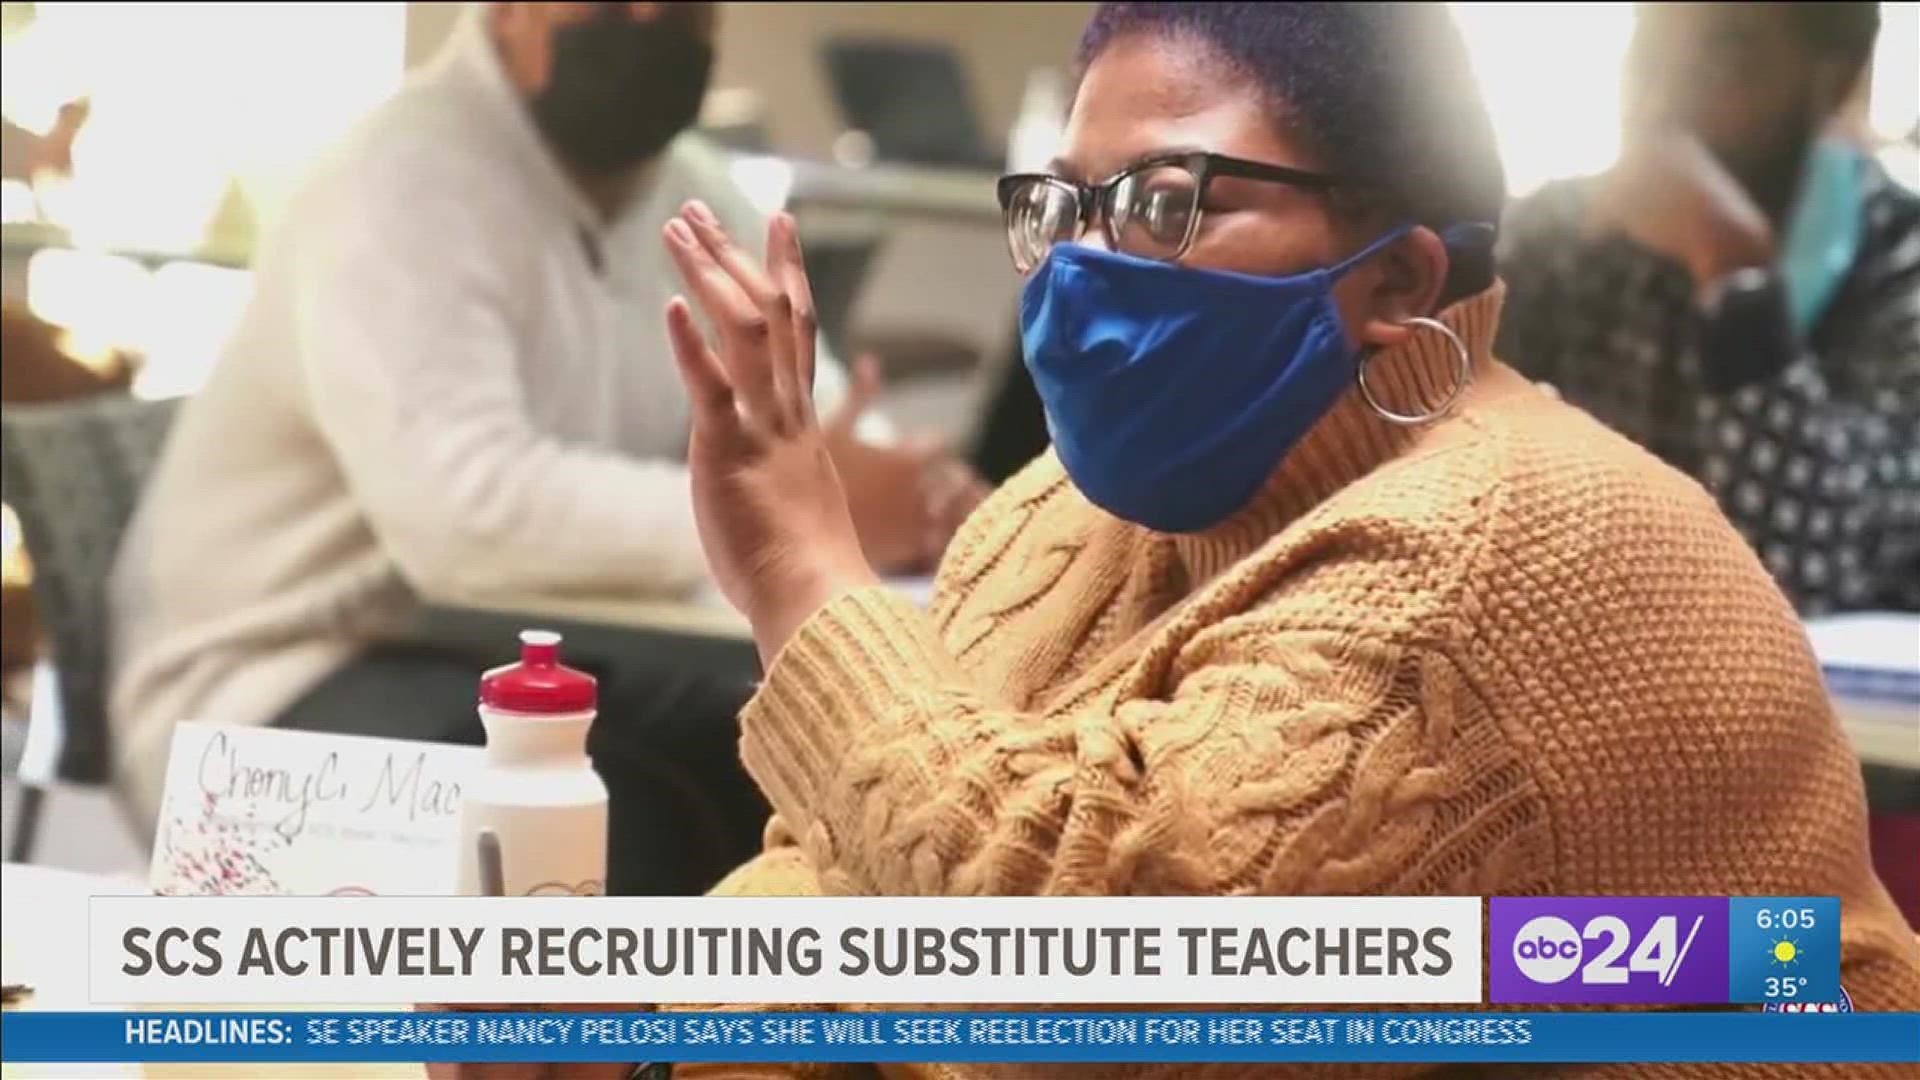 Earlier this month, the district changed the requirements and upped the pay for substitute teachers.